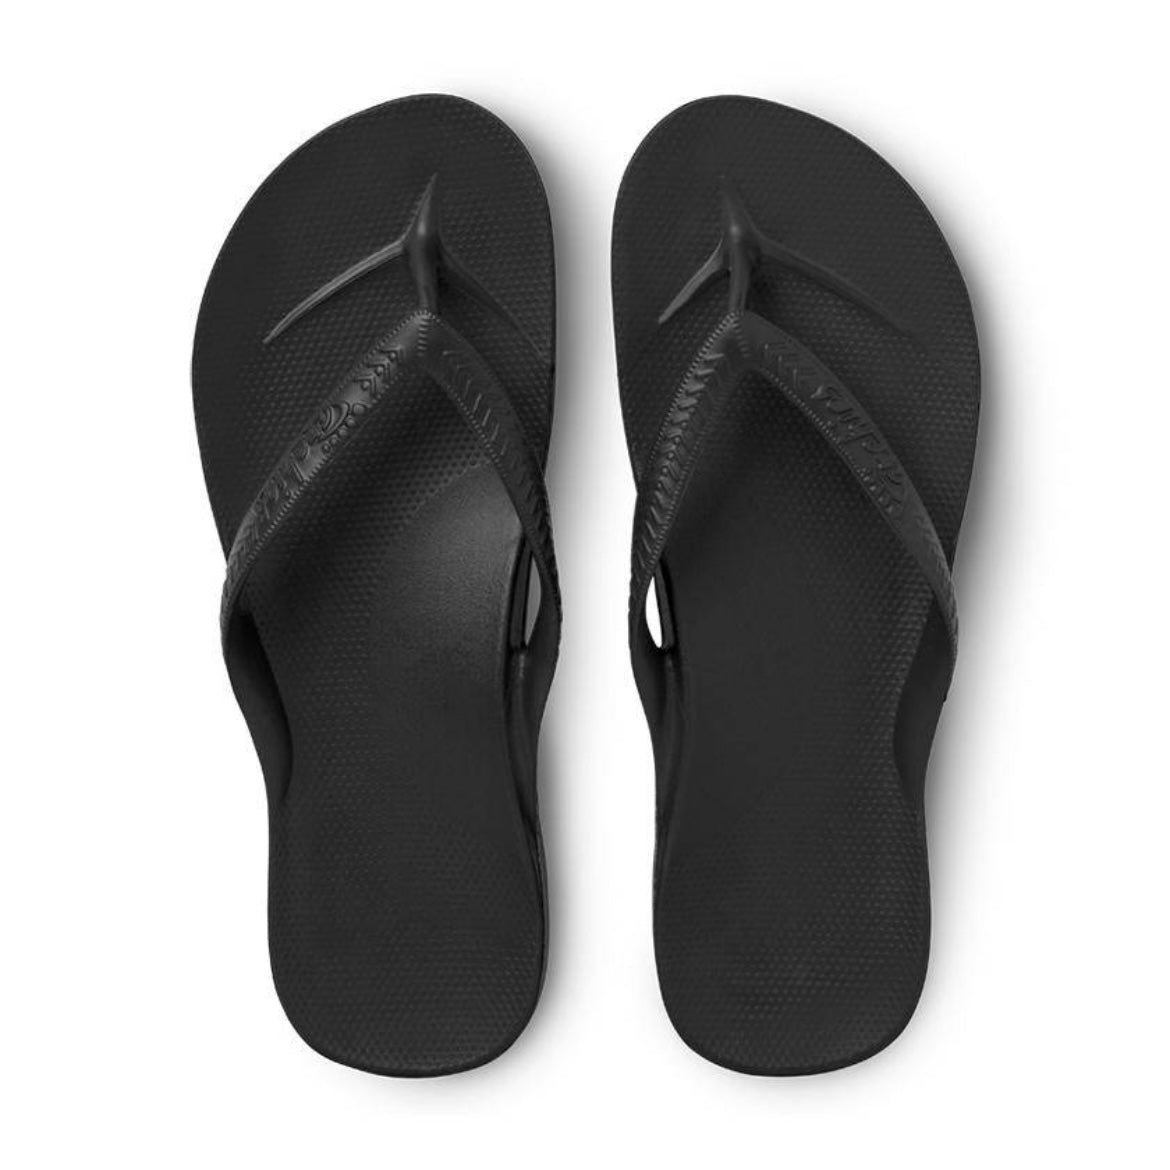 Archies Black Arch Support Thongs Flip Flop Orthotic